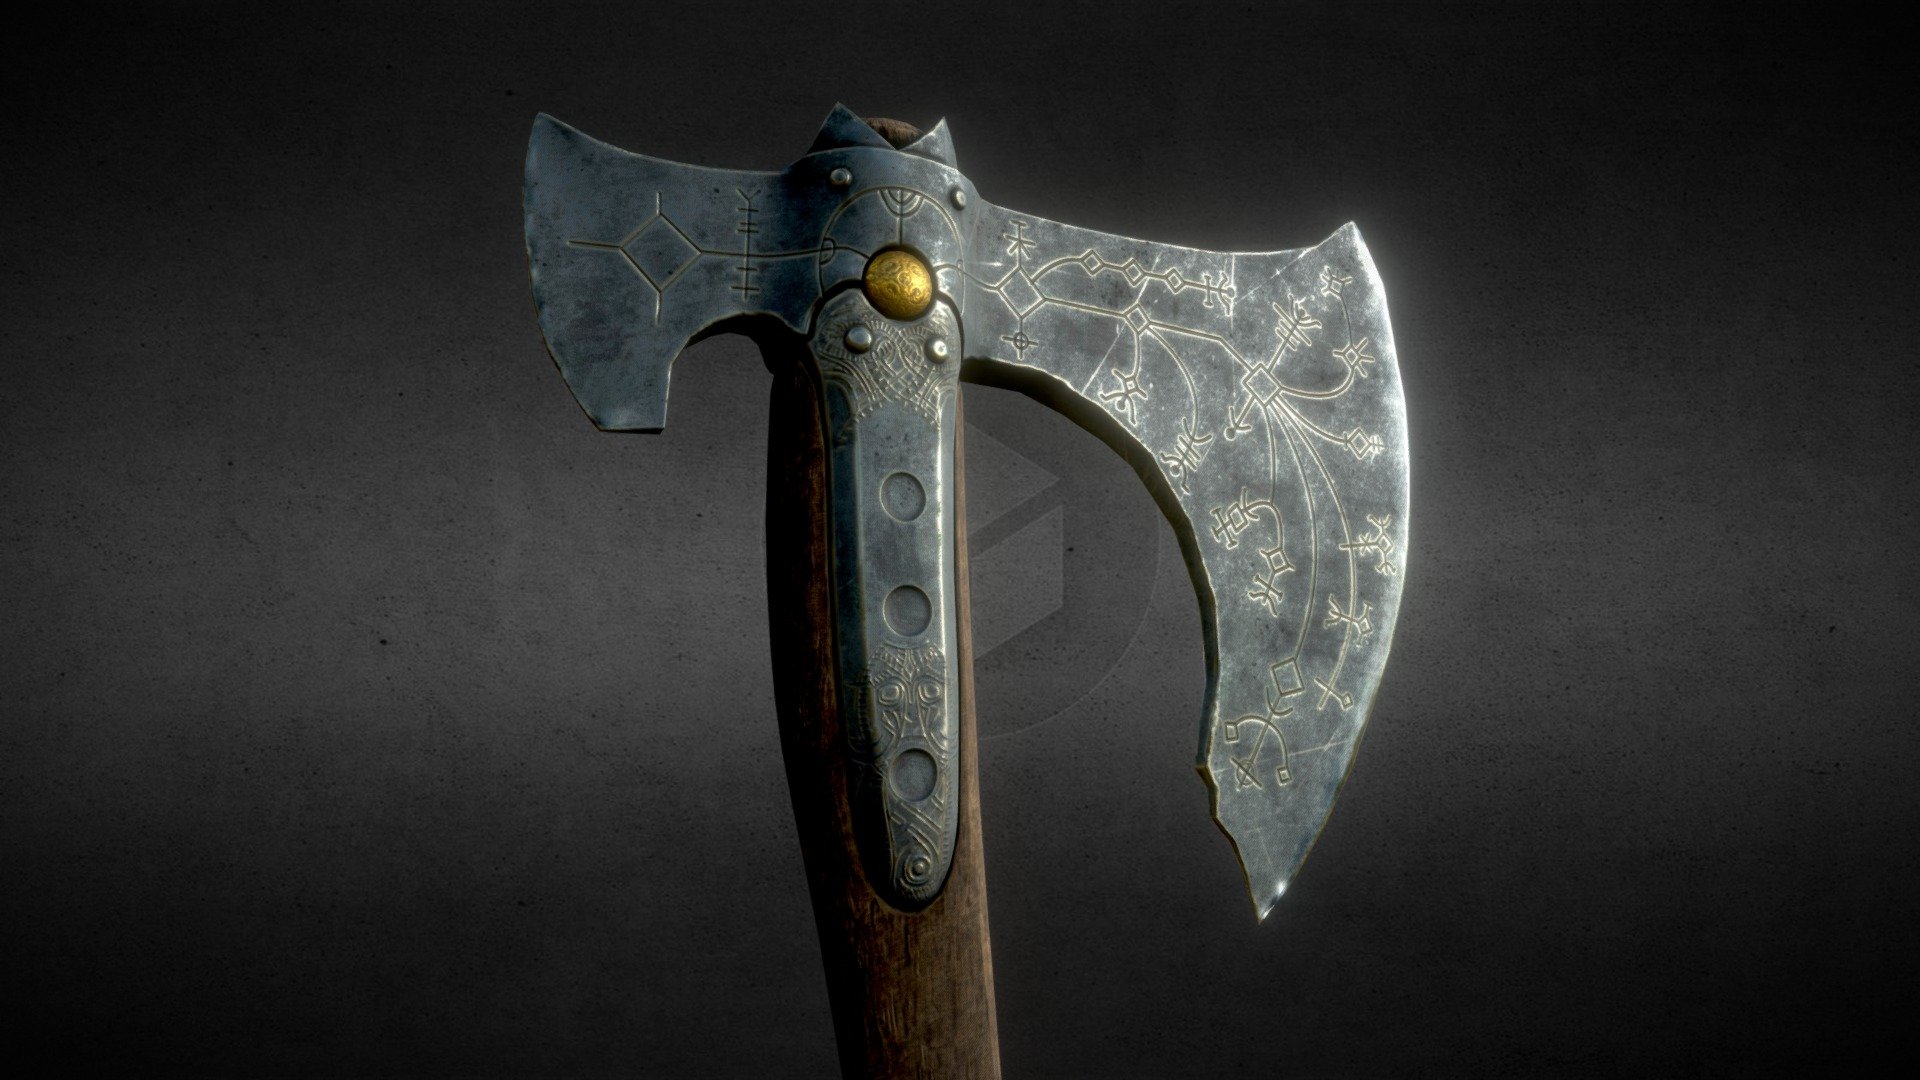 Leviathan Axe from God of War
https://www.artstation.com/artwork/N5Ly6g - Leviathan Axe - Download Free 3D model by Sky_Hunter 3d model